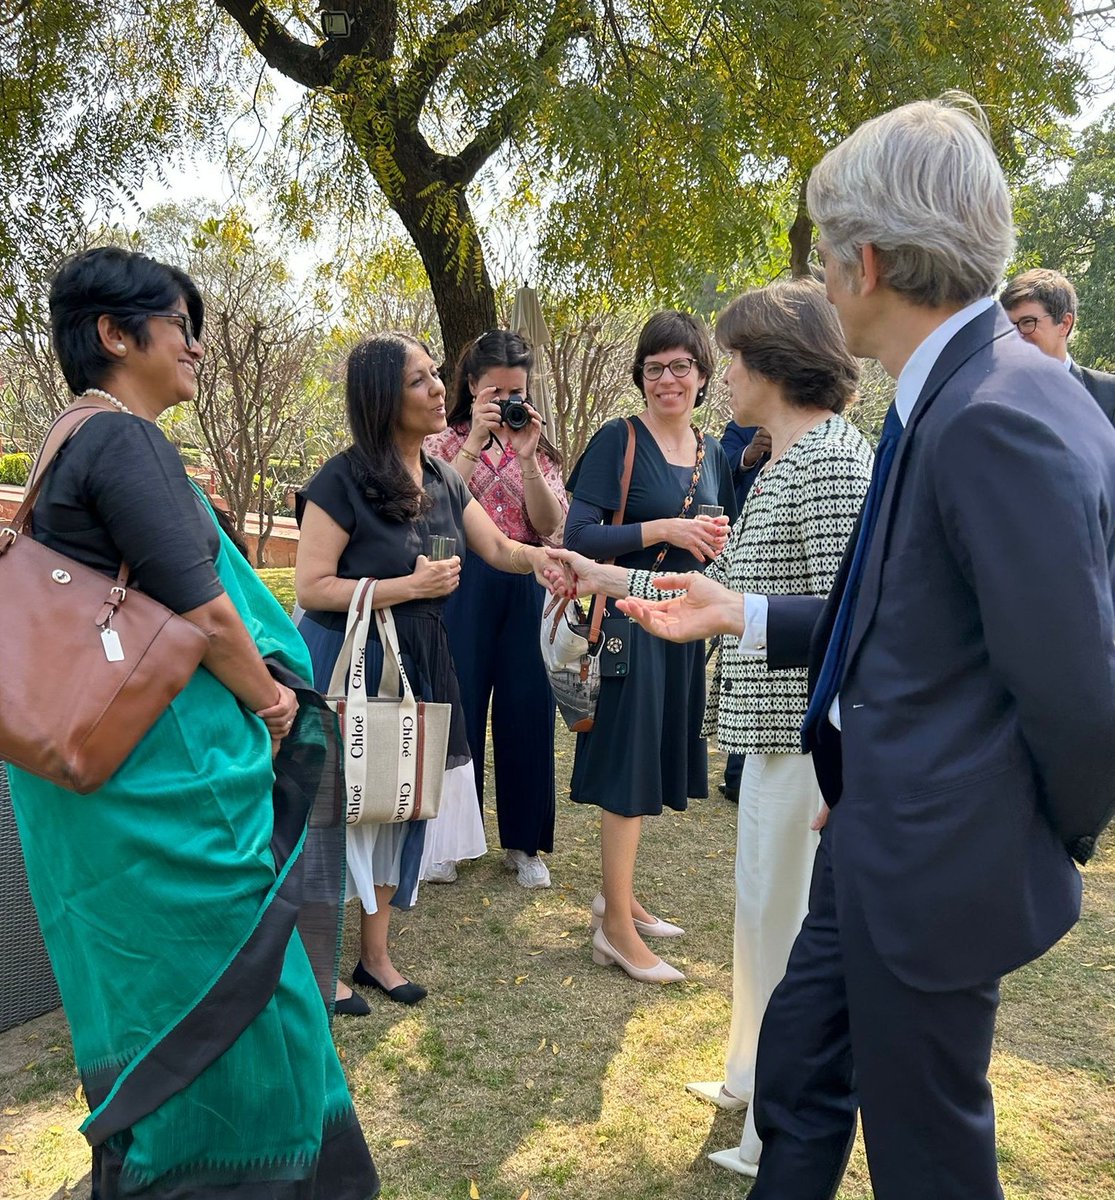 In #India, #Diplomatieféministe acting with outstanding women of various parts of civil society.
These bonds enrich each other.
Let's act everywhere around the world to promote gender equality.